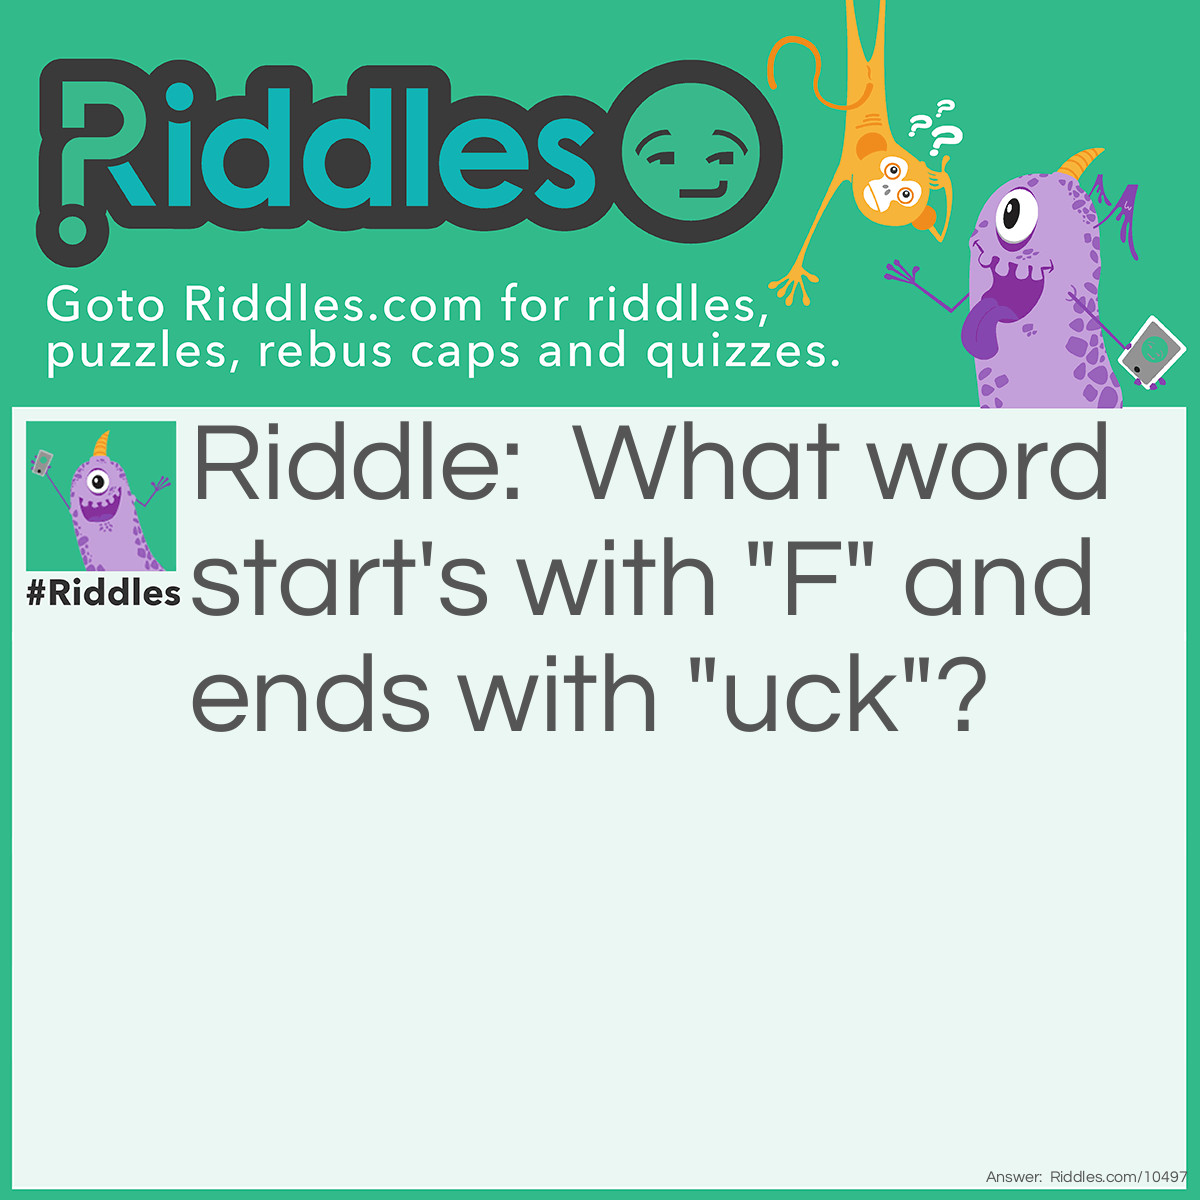 Riddle: What word start's with "F" and ends with "uck"? Answer: "Firetruck"! It's not a swear word!